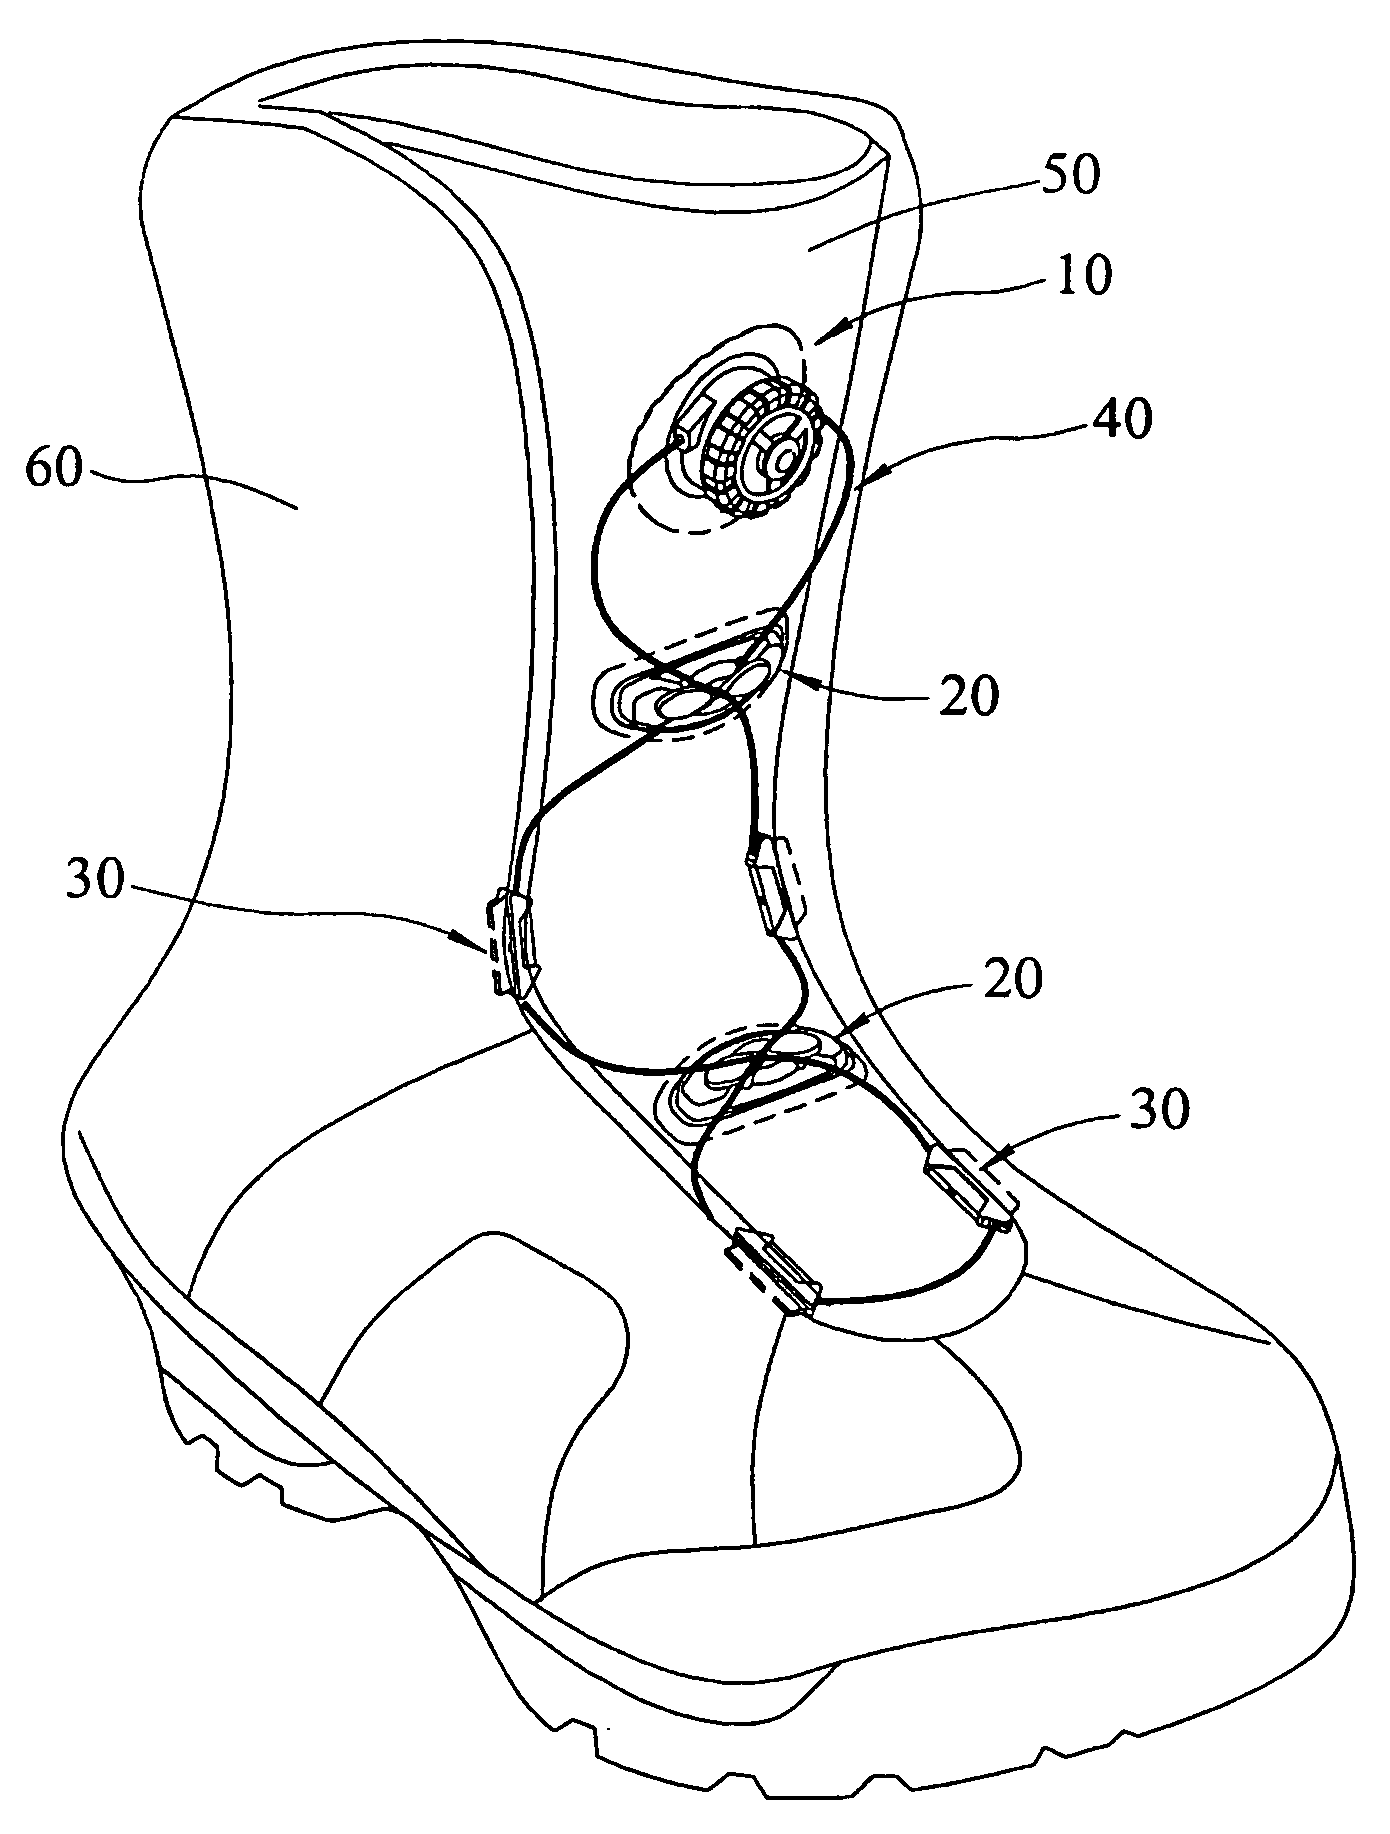 Shoelace fastening assembly